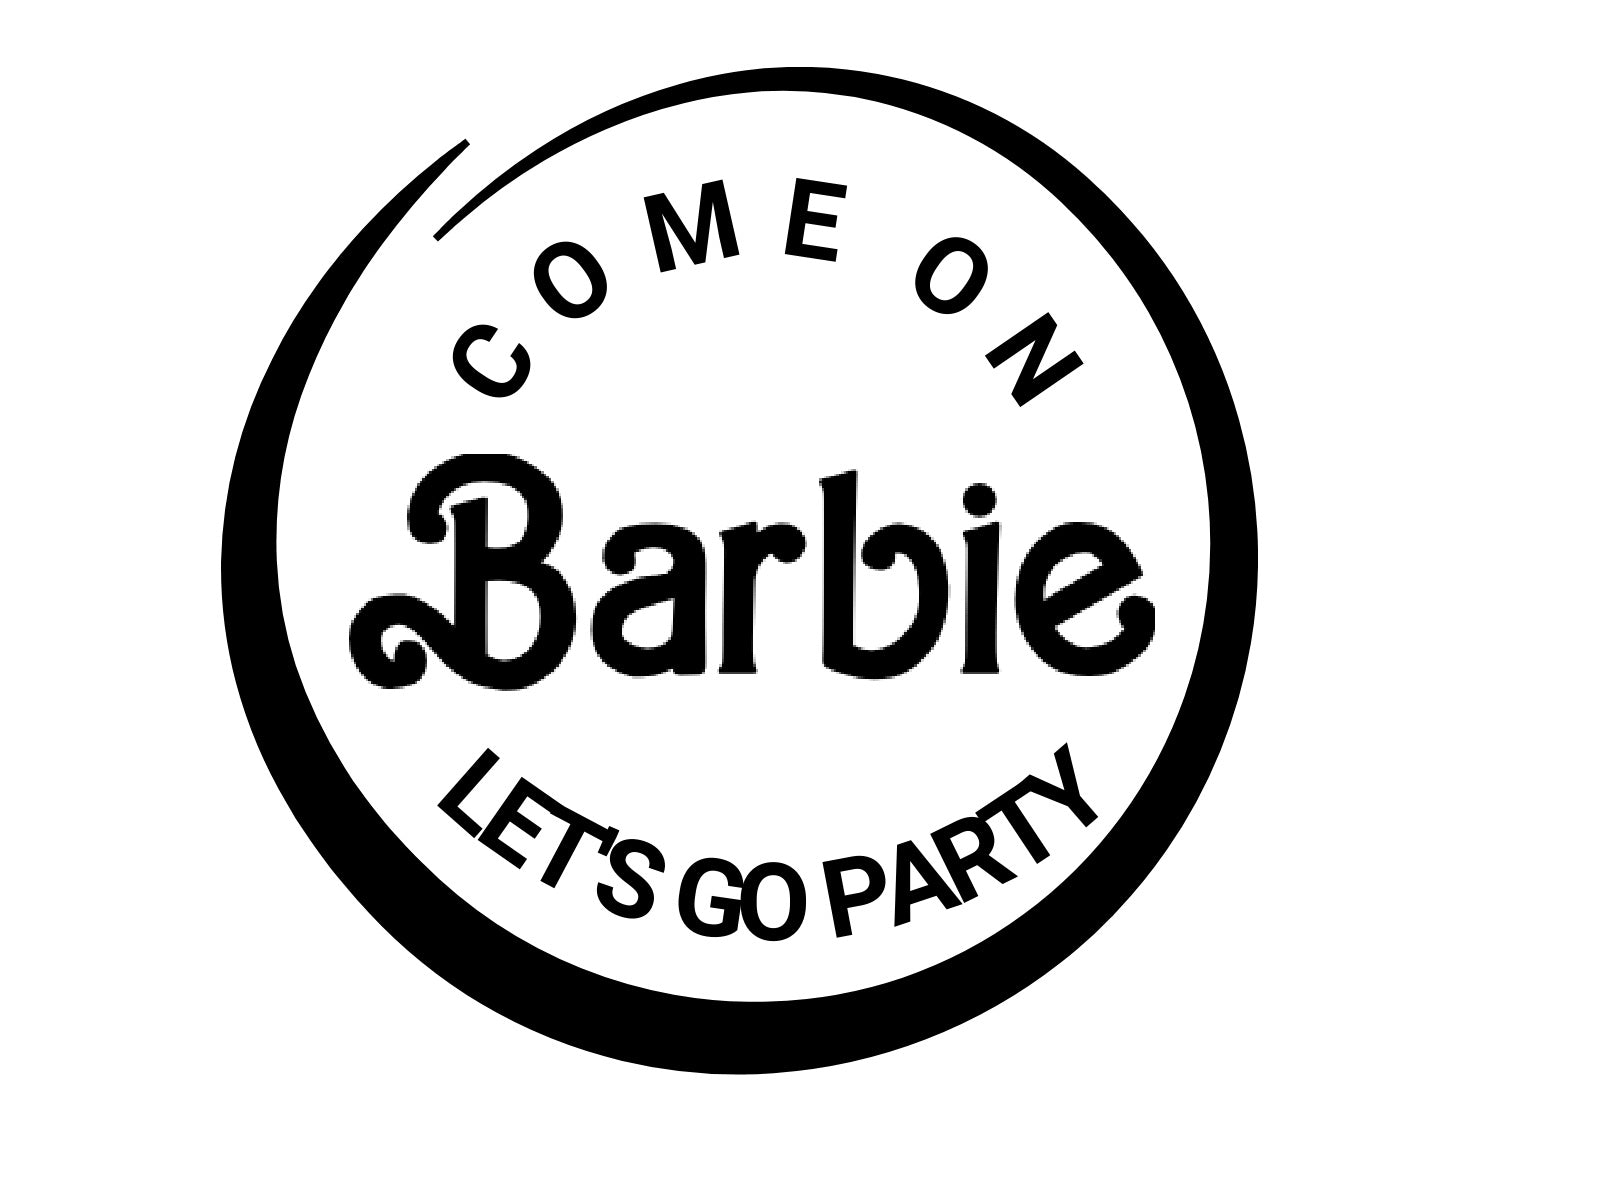 Come On Barbie. Let's Go Party